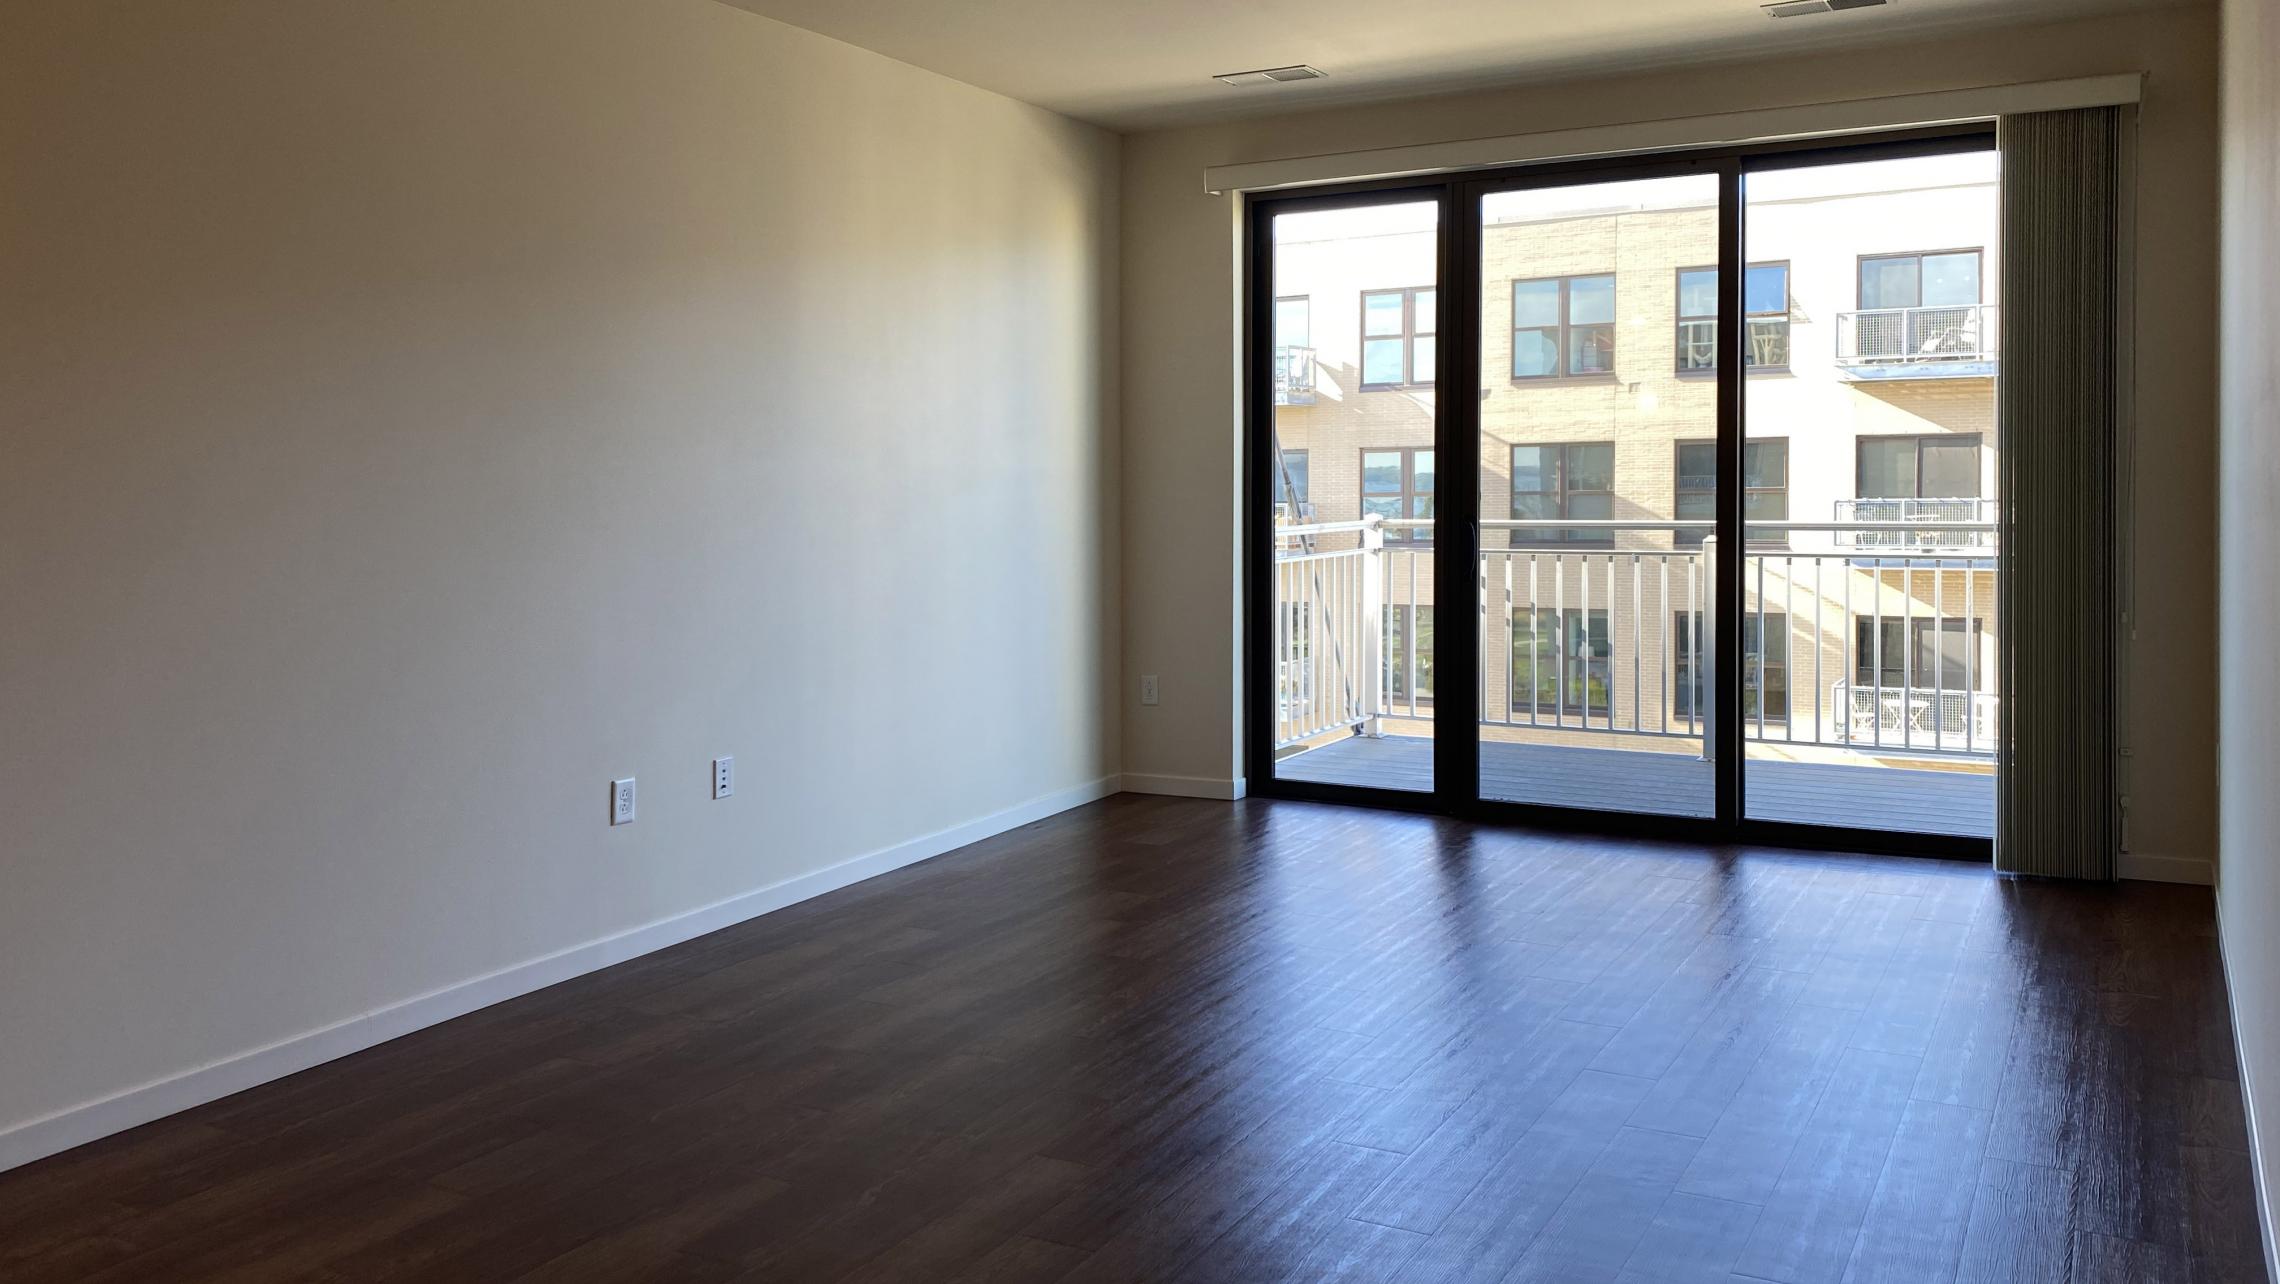 Nine-Line-at-The-Yards-Apartment-424-Two-Bedroom-Lake-View-Natural-Light-Sunny-Modern-Upscale-Designe-Luxury-Luxurious-Balcony-Views-Fitness-Lounge-Courtyard-Dogs-Cats-Bike-Trail-Downtown-Capitol